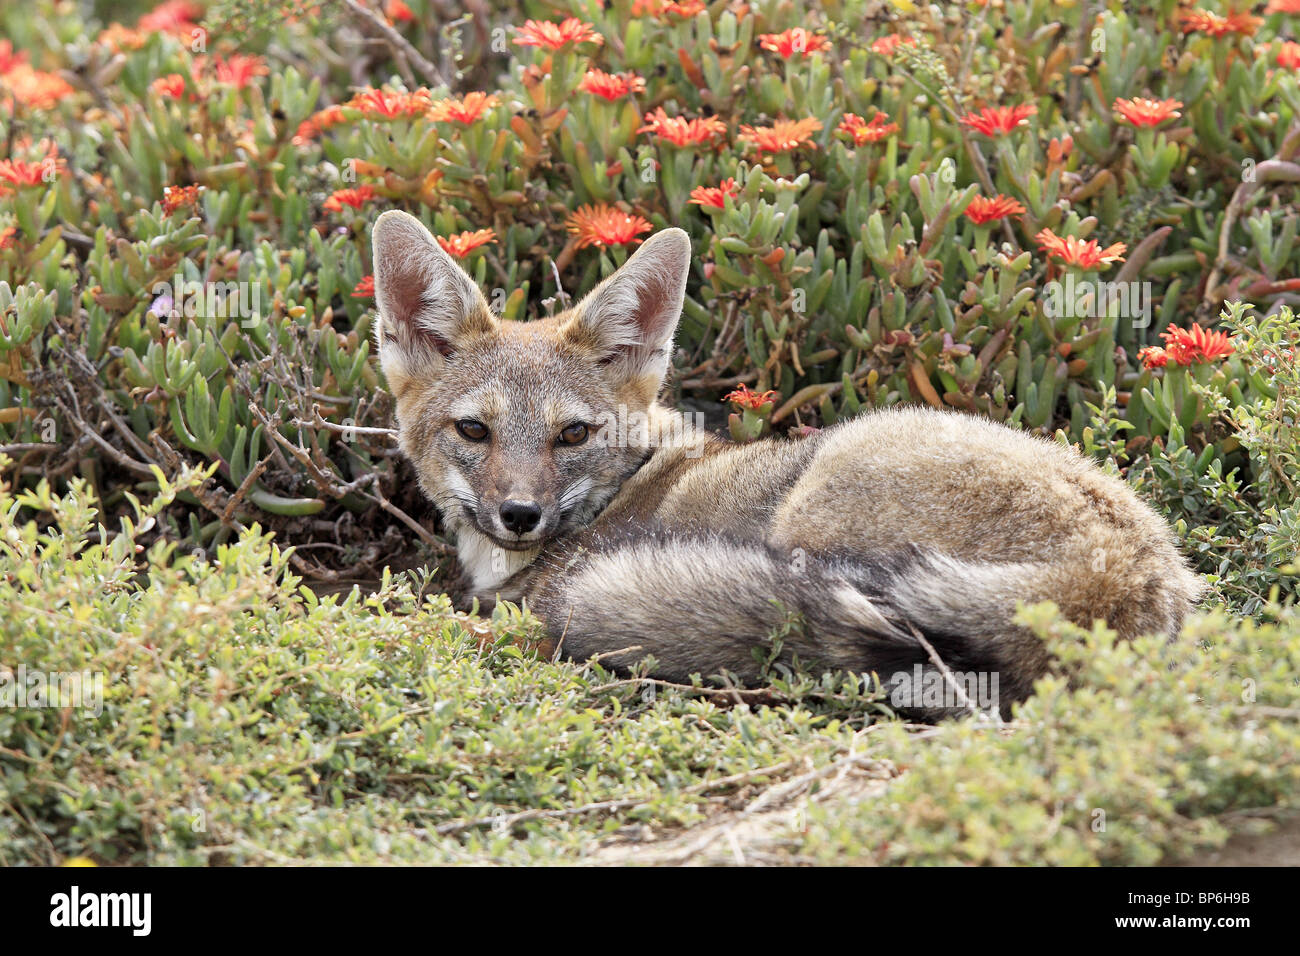 Grey Zorro, Patagonian Fox, South American Gray Fox (Dusicyon griseus, Pseudalopex griseus), adult lying in front of flowers. Stock Photo